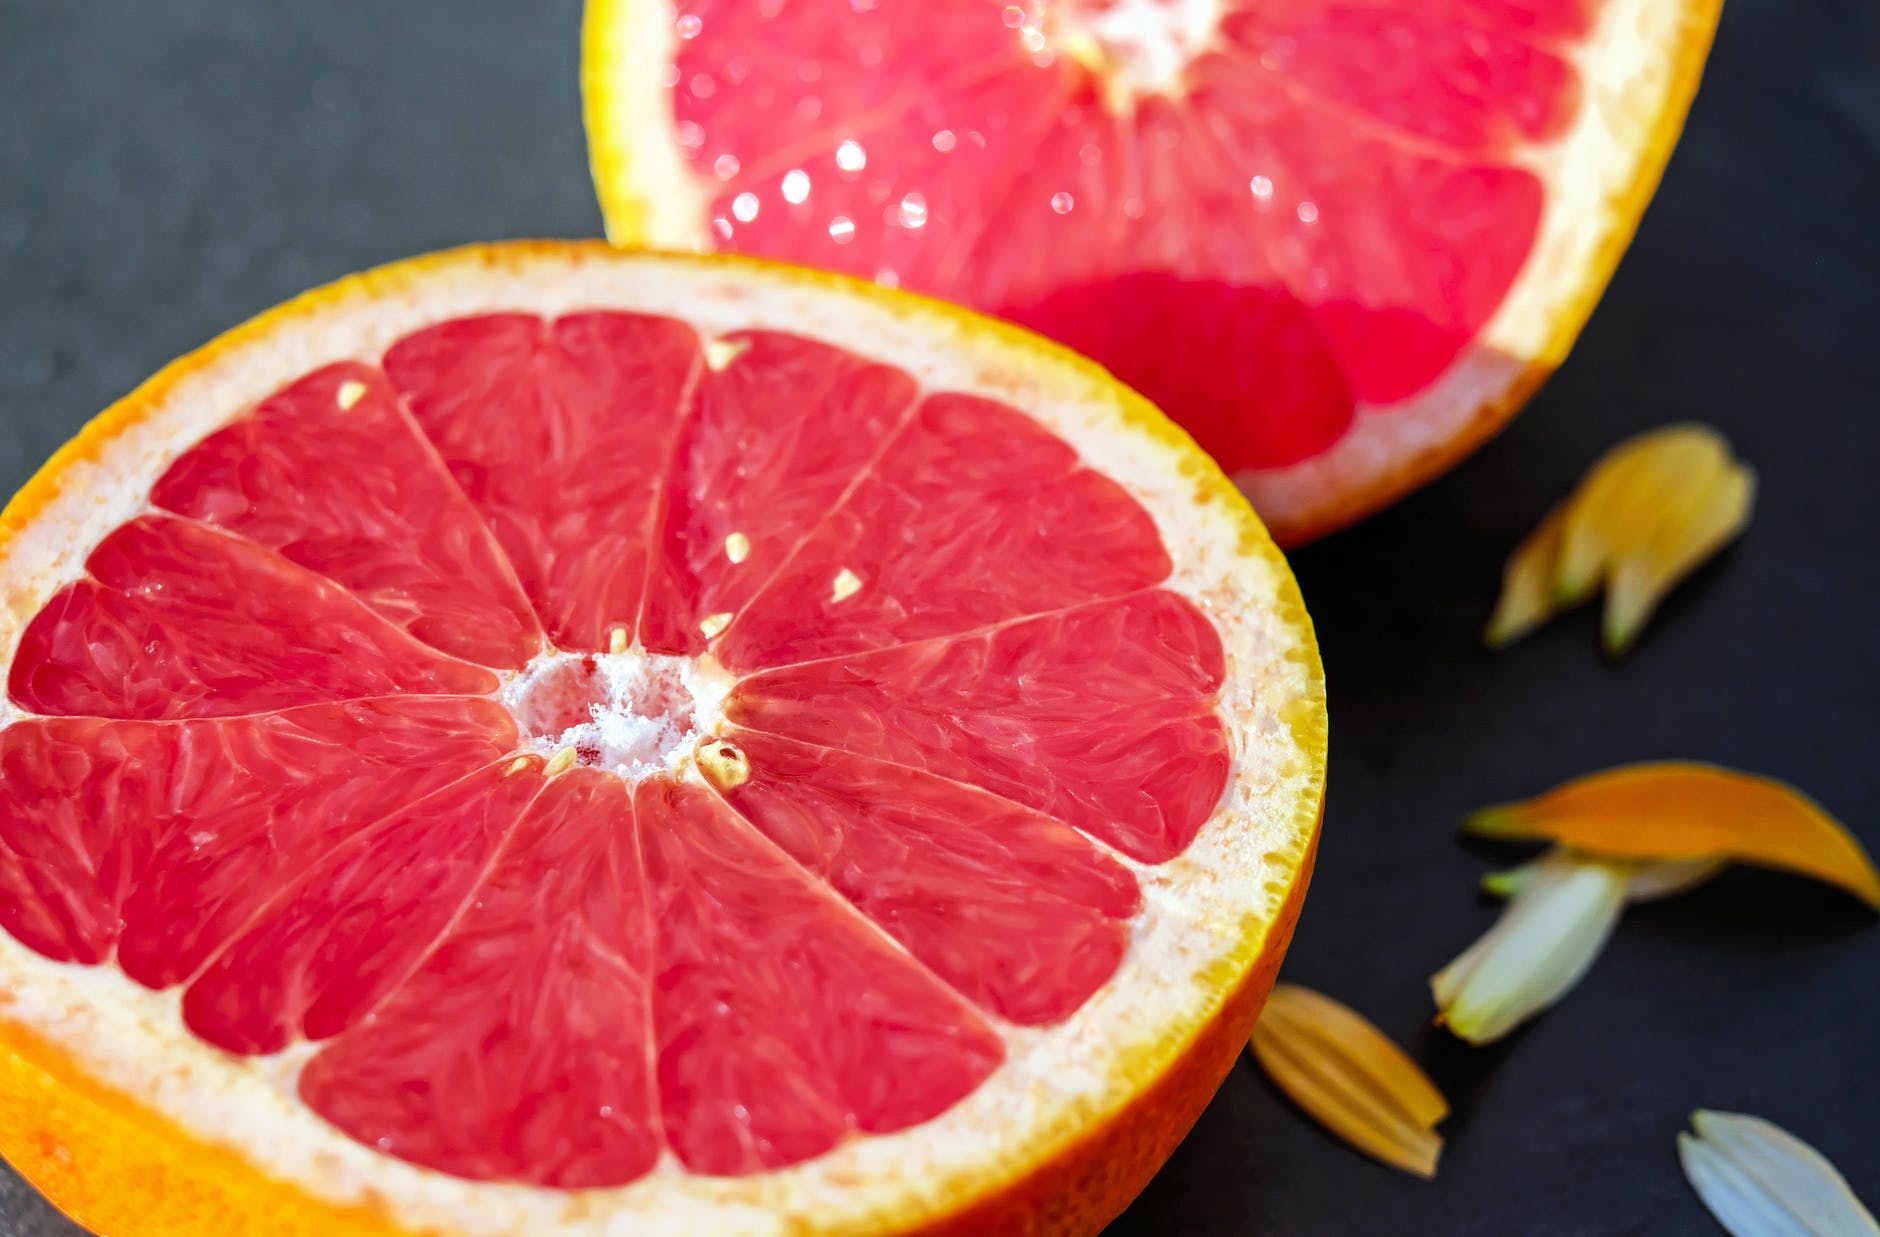 A sliced grapefruit. Grapefruit is used in many alcohol free drinks